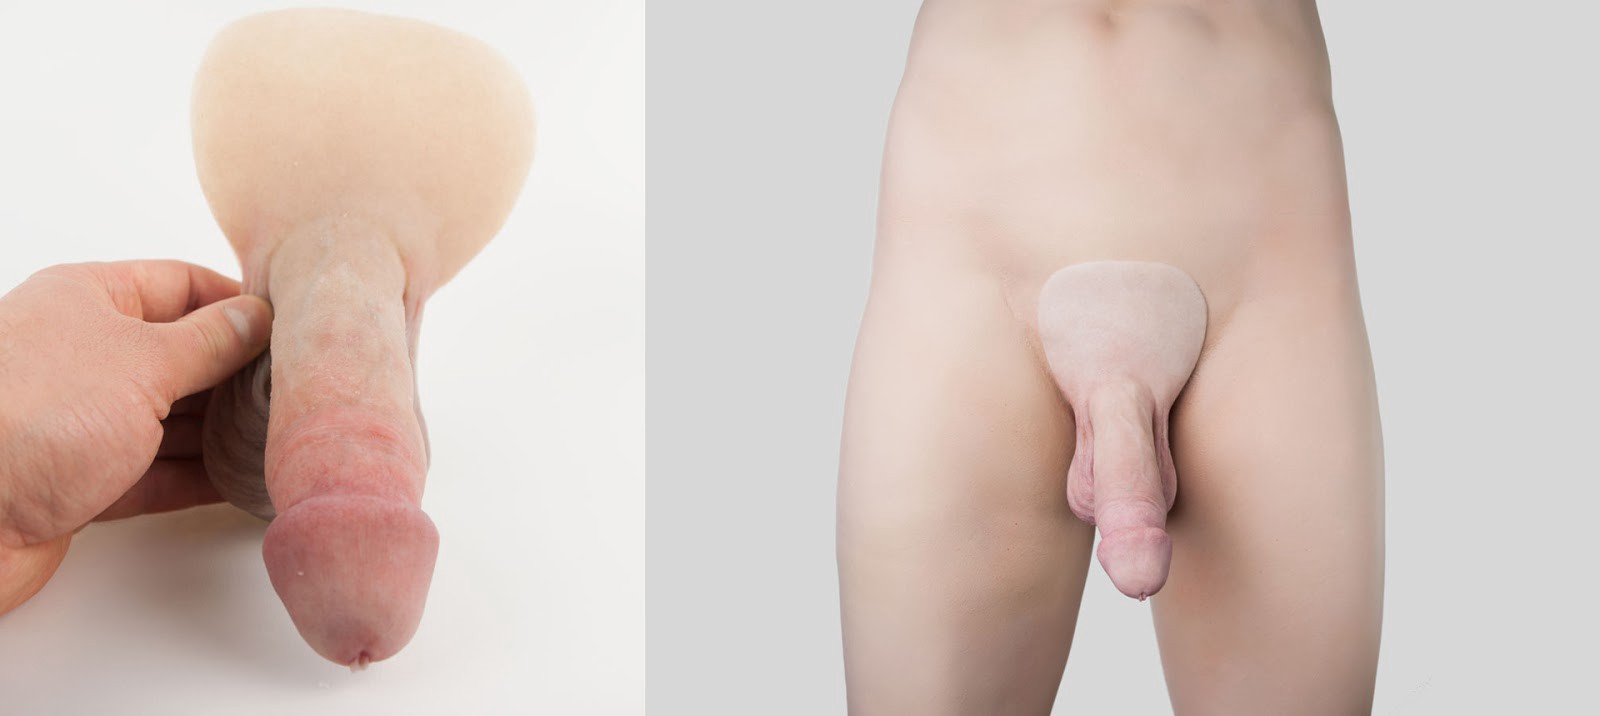 FTM penis prosthetic attached to the boddy